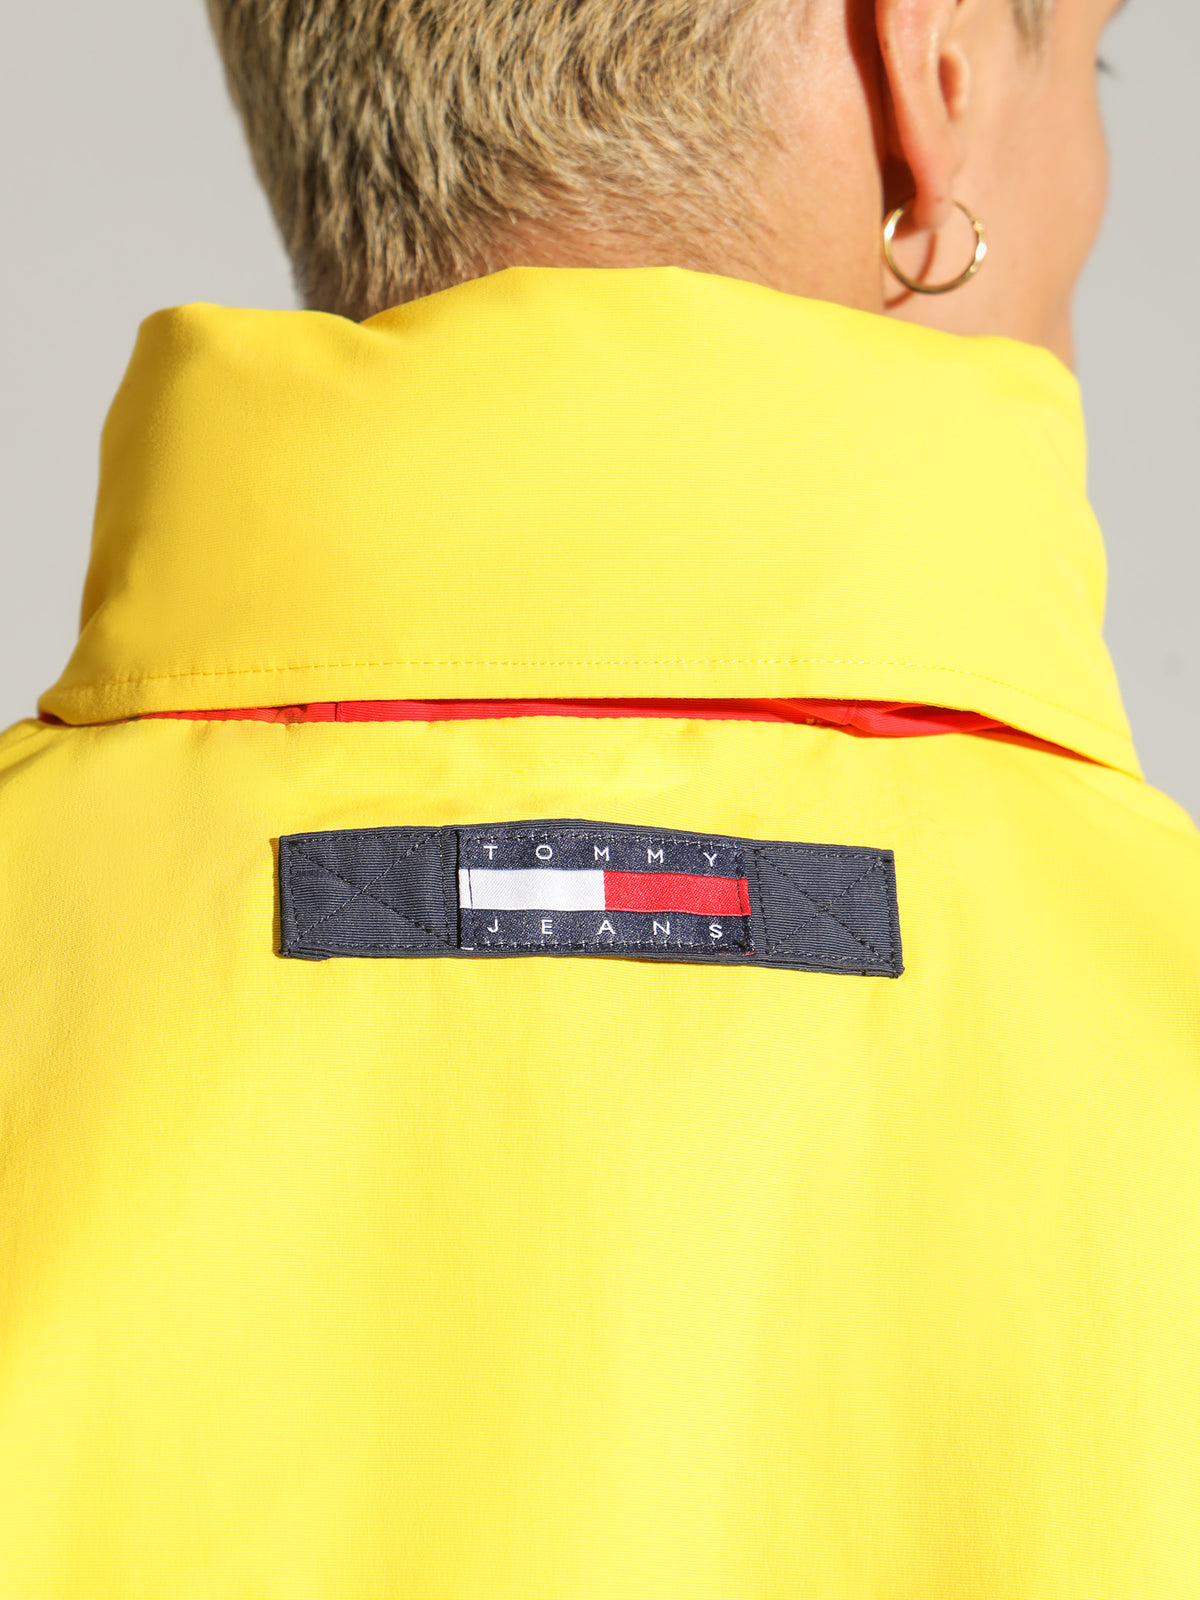 Reversible Archive Chicago Windbreaker in Twilight Navy, Yellow &amp; Red